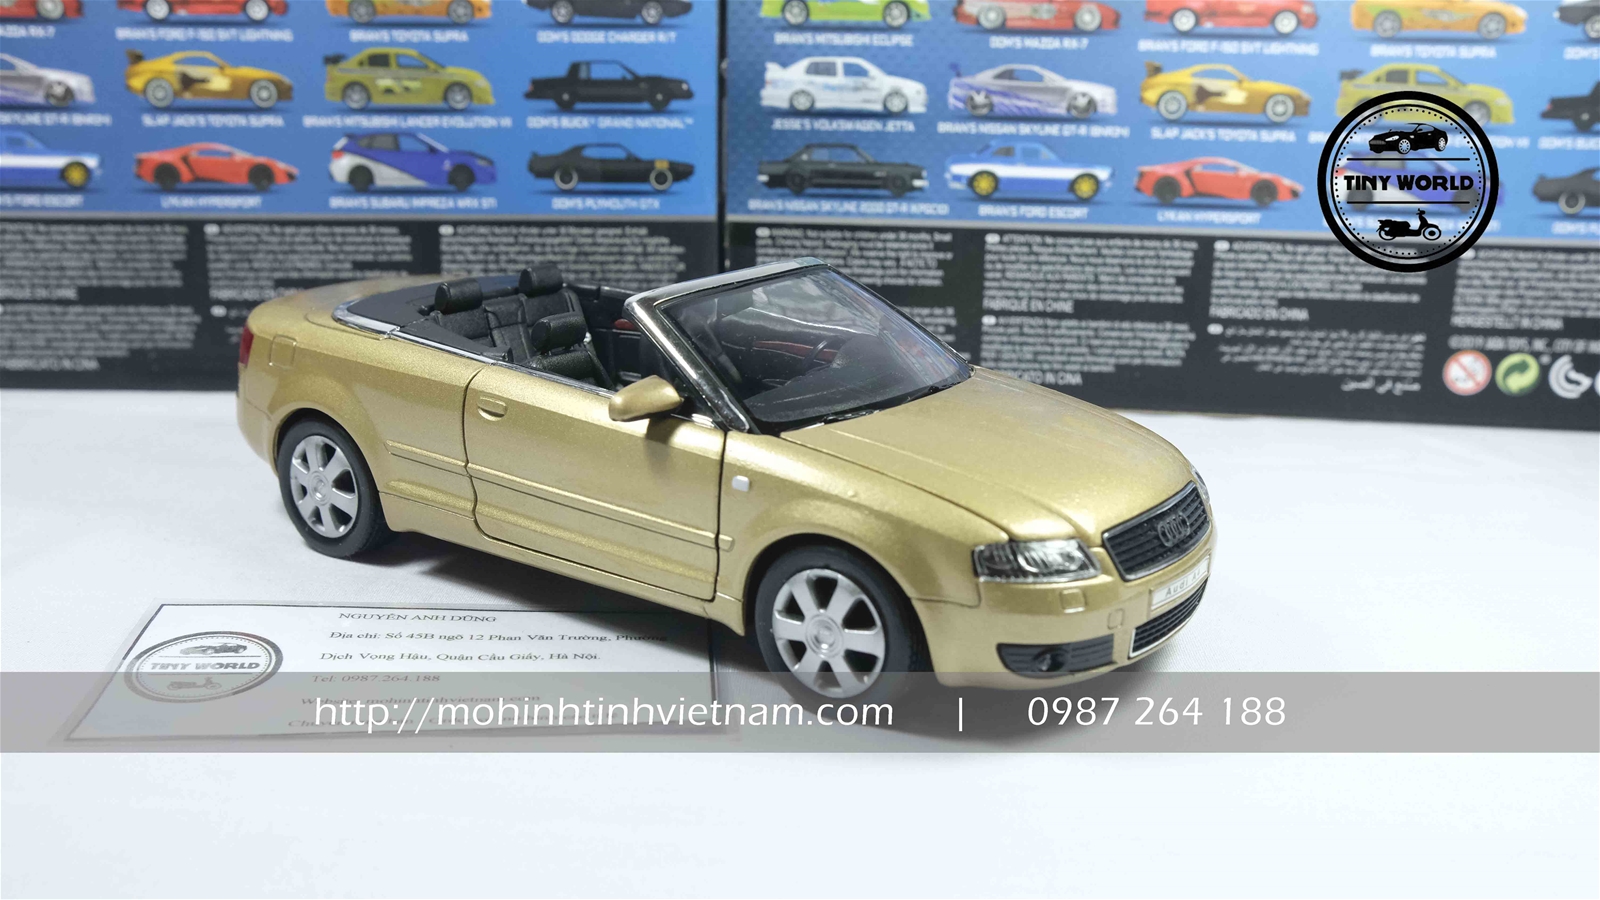 AUDI A4 CABRIOLET (GOLD) 1:24 WELLY